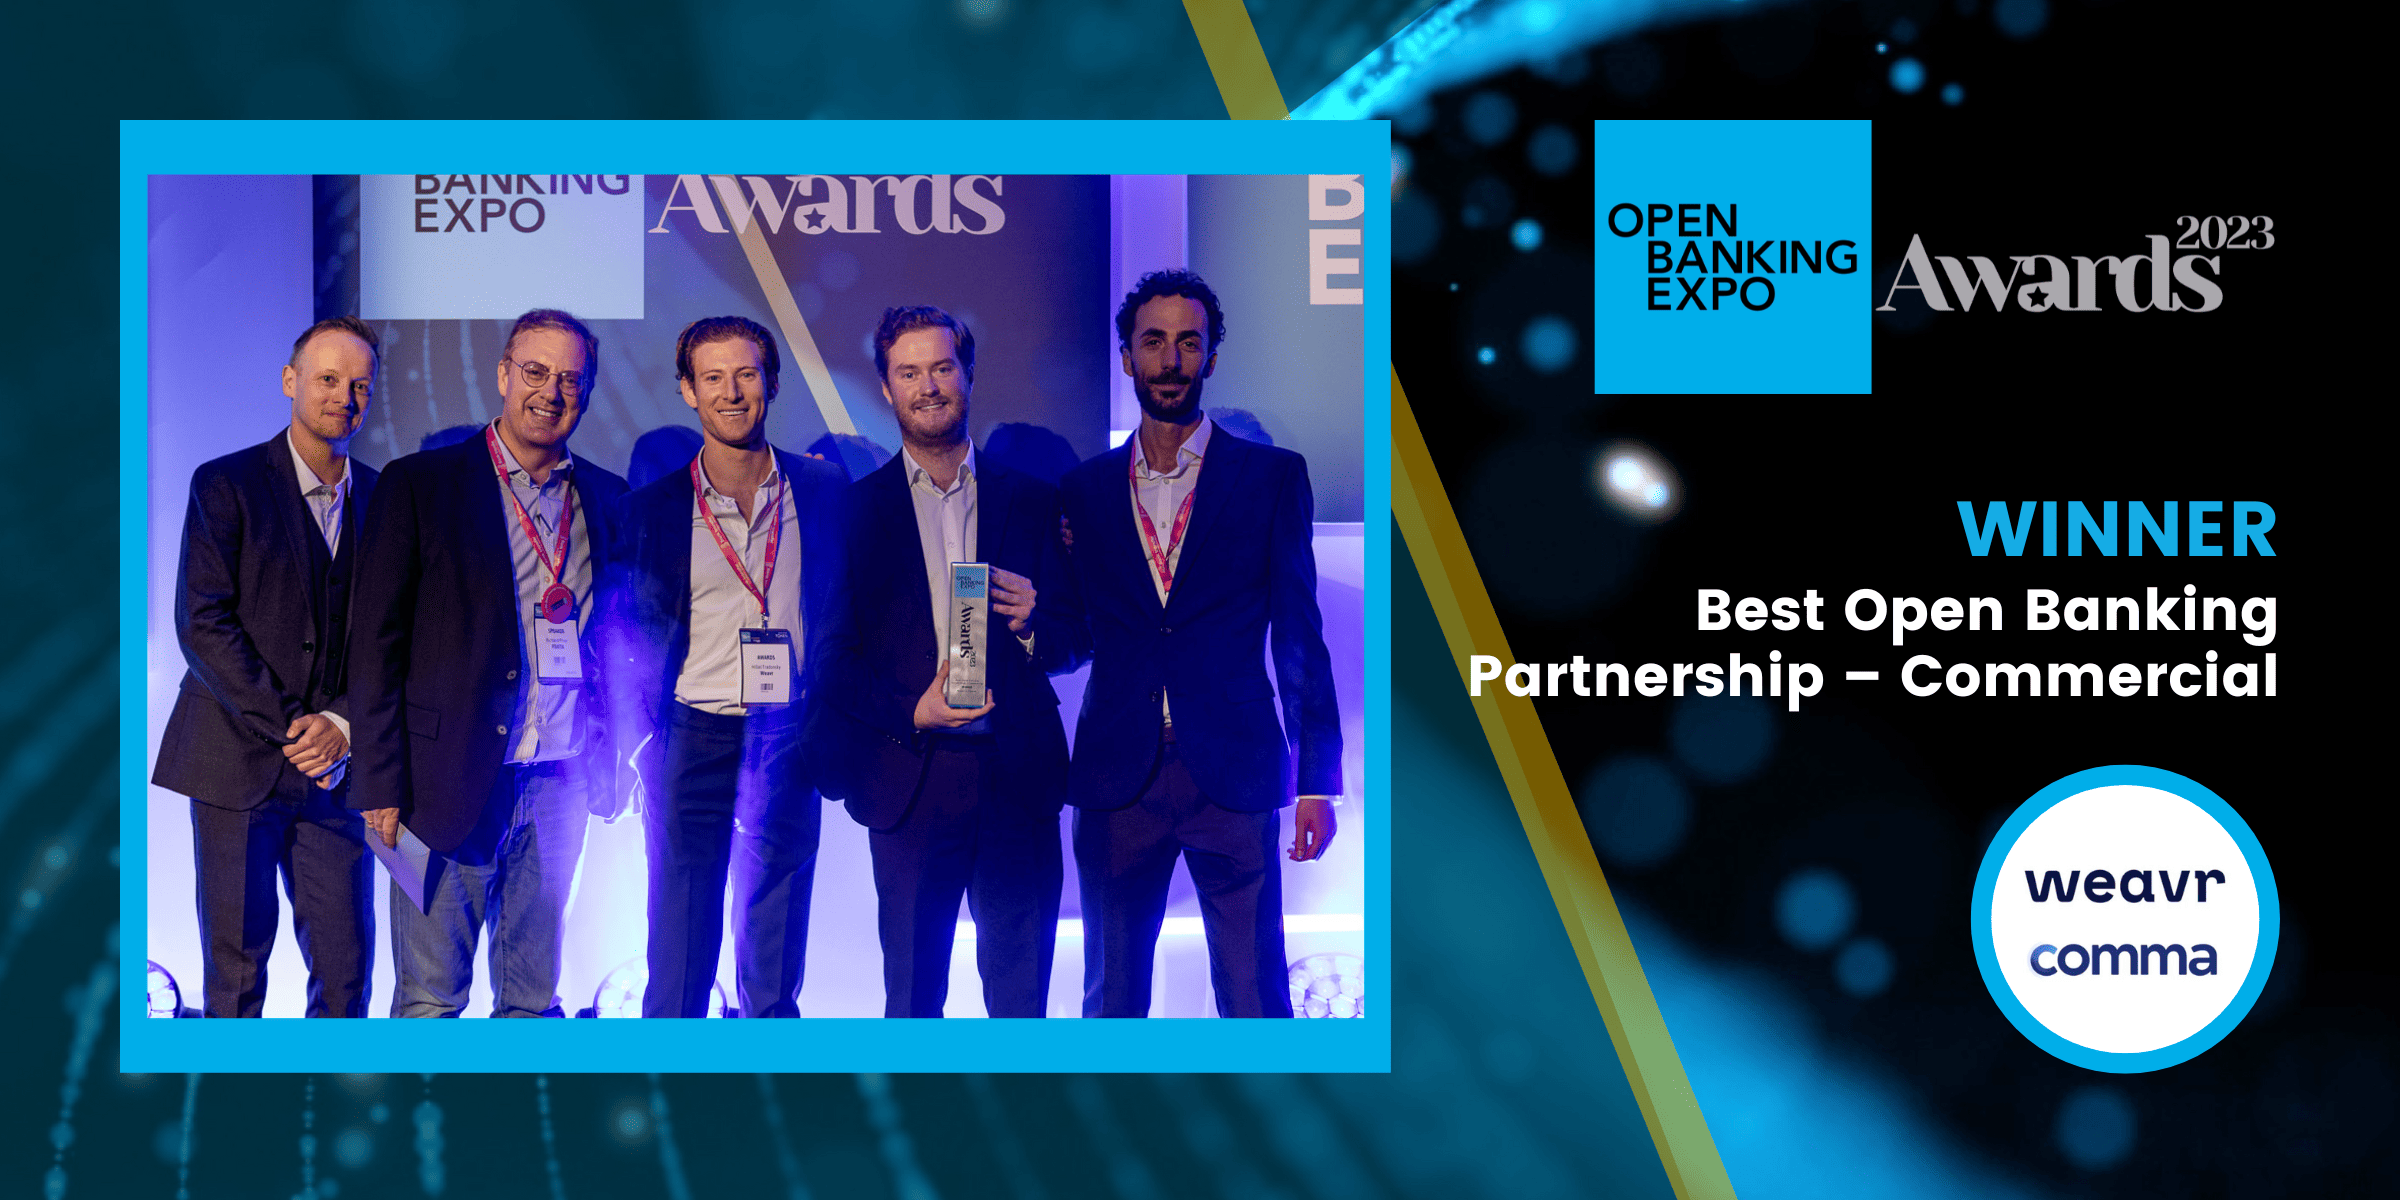 Best Open Banking Partnership – Commercial